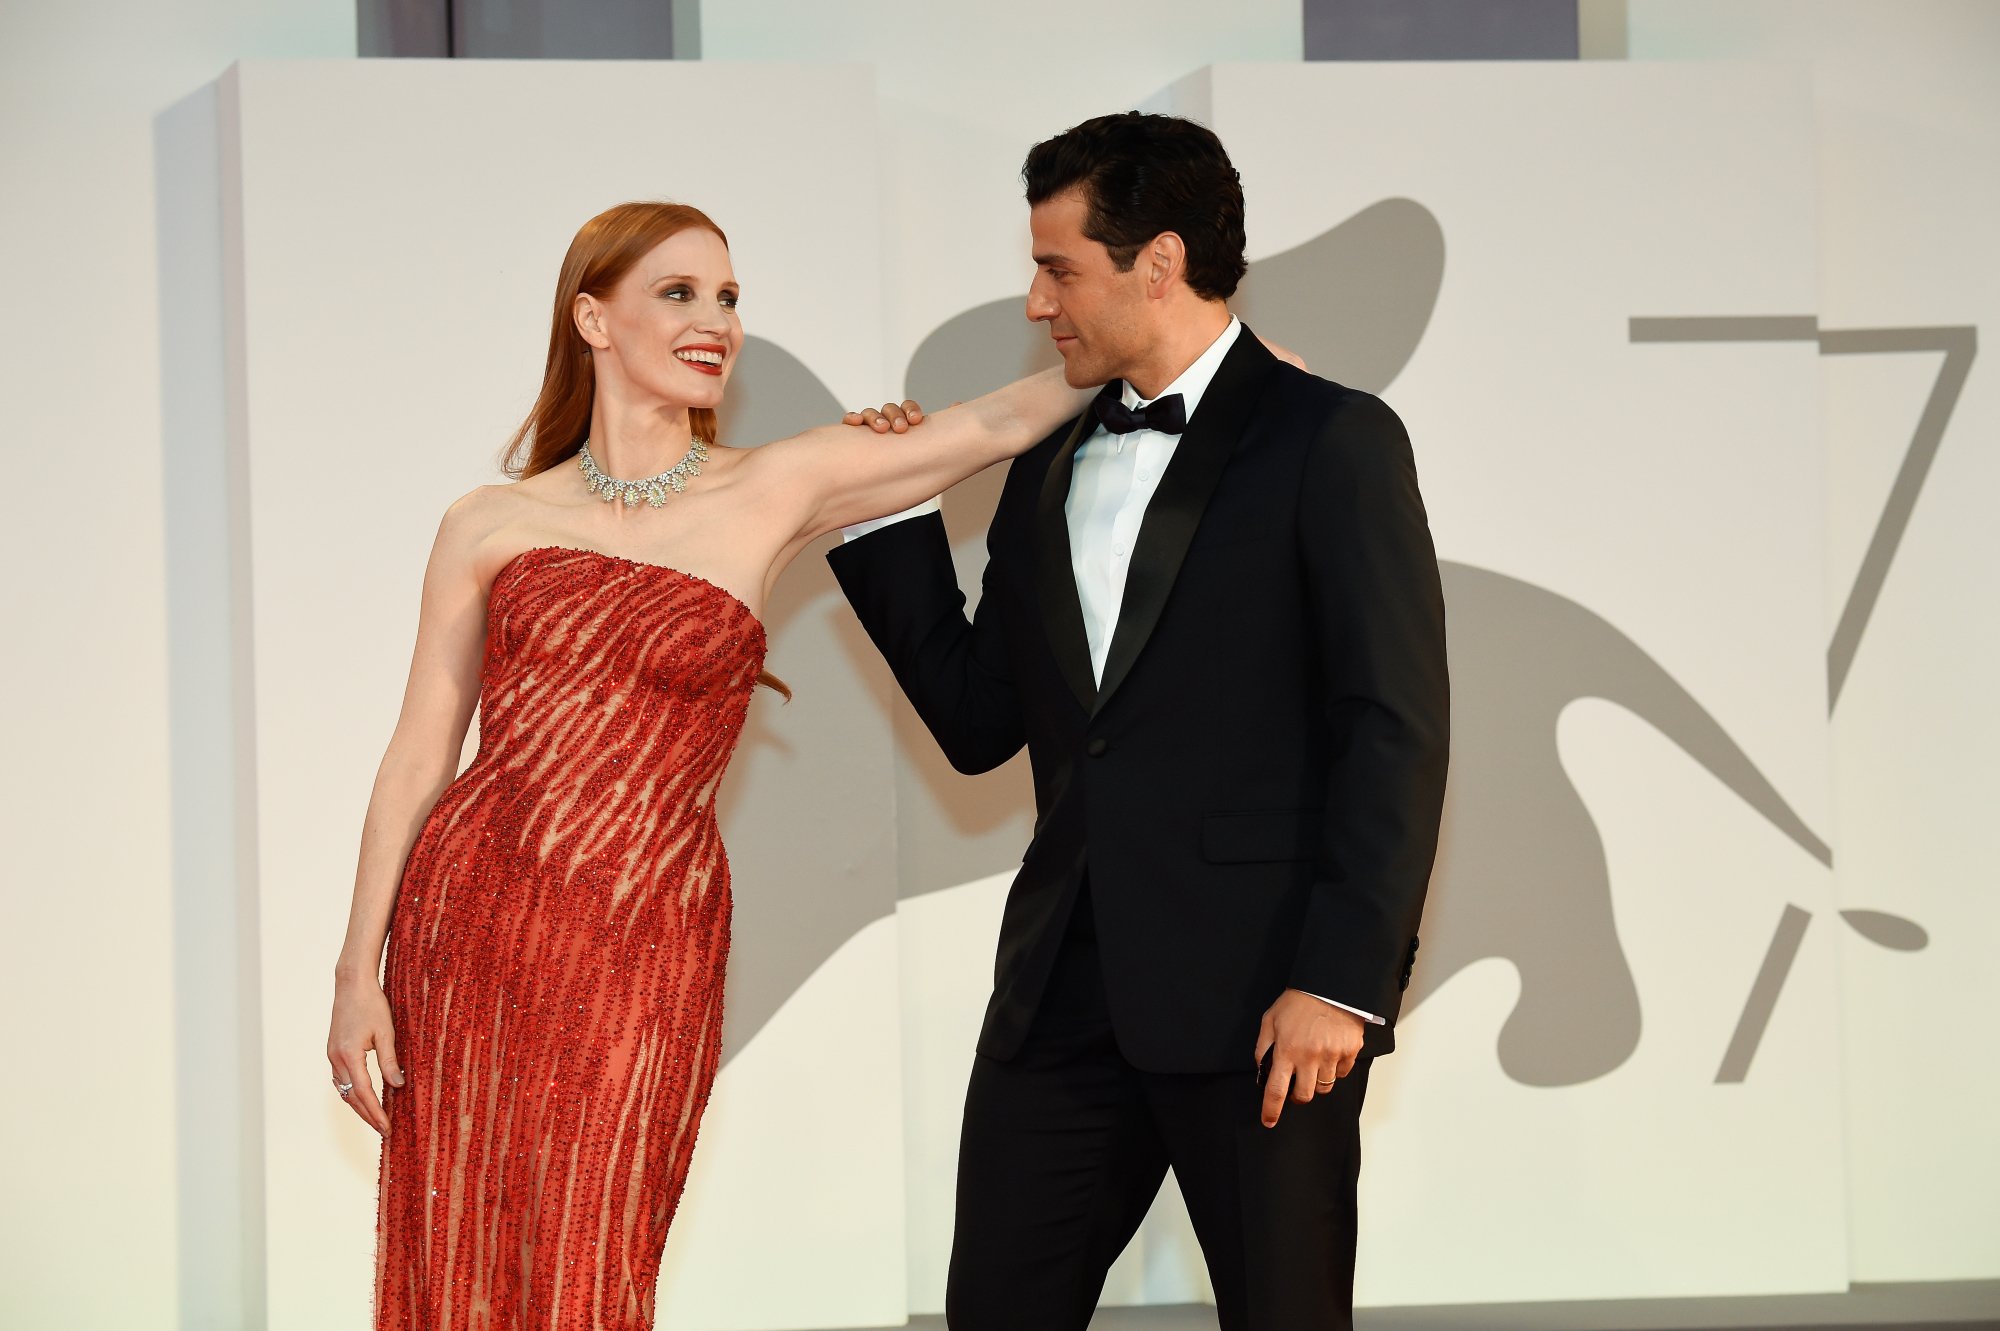 Jessica Chastain and Oscar Isaac at the 'Scenes From a Marriage' premiere at the Venice International Film Festival